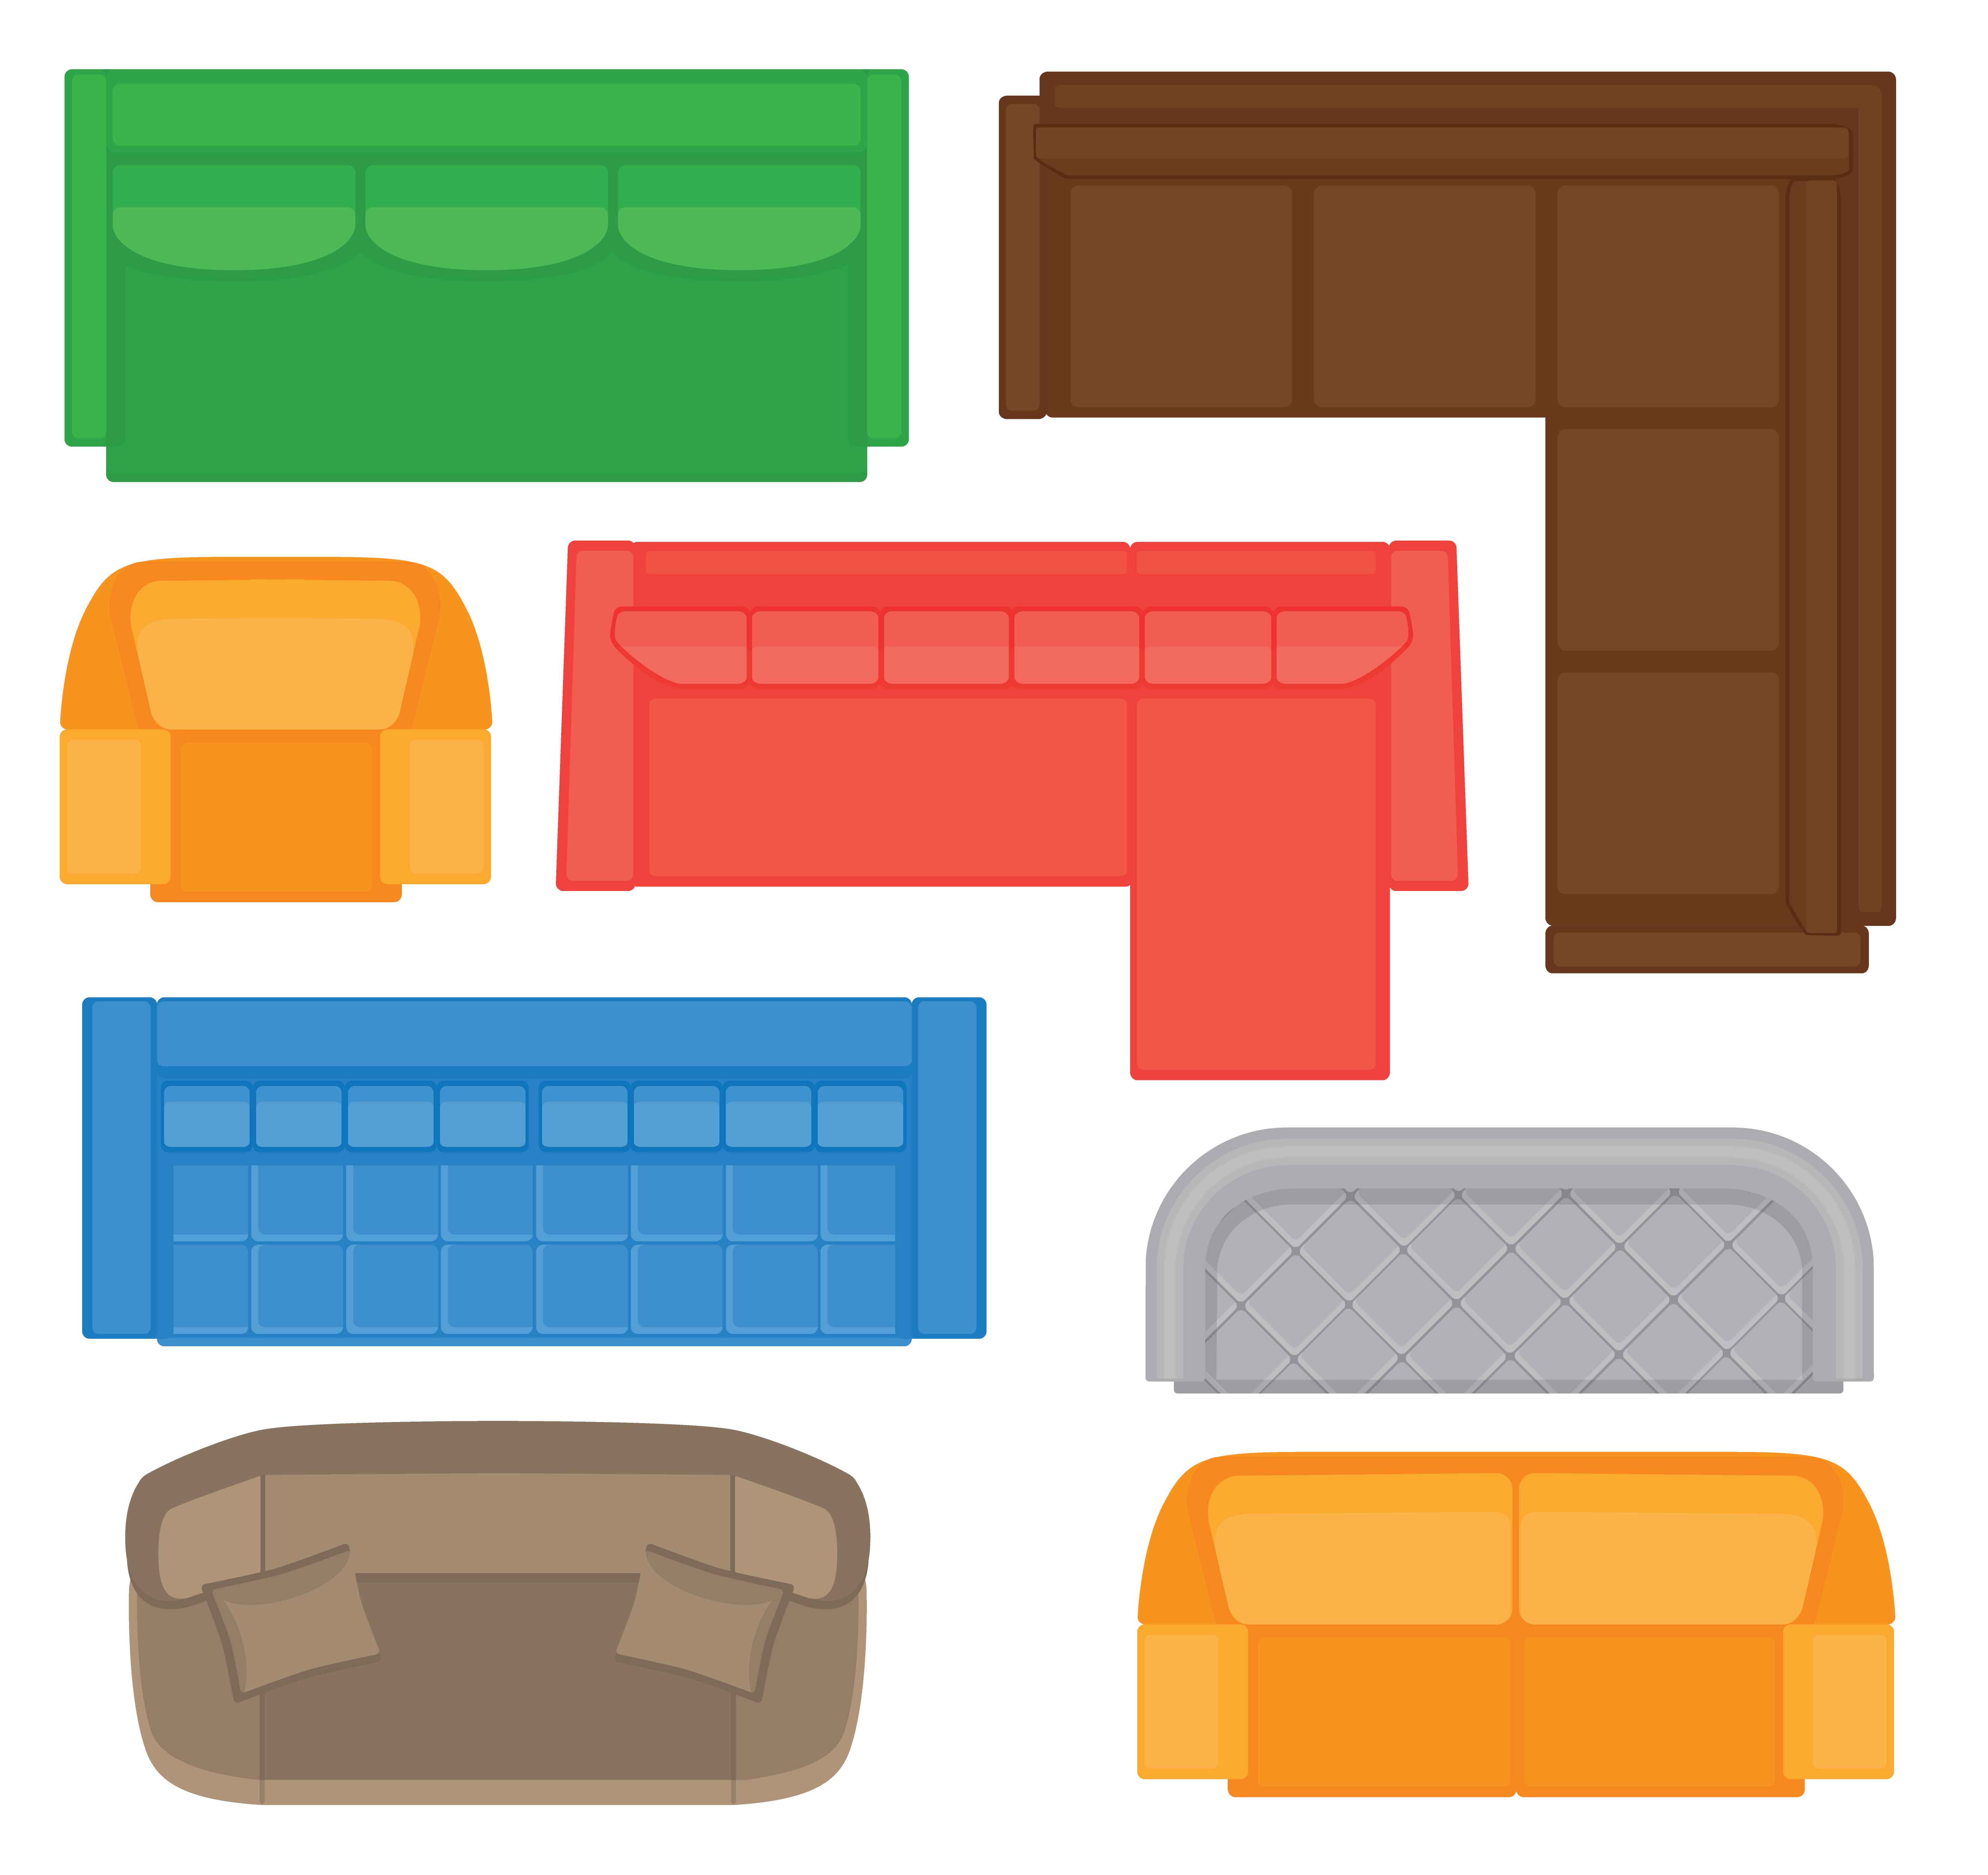 Furniture Top View Collection For Interior Design Vector Illustration In Flat Style Set Of Different Sofas Types For Floor Plan Download Free Vectors Clipart Graphics Vector Art